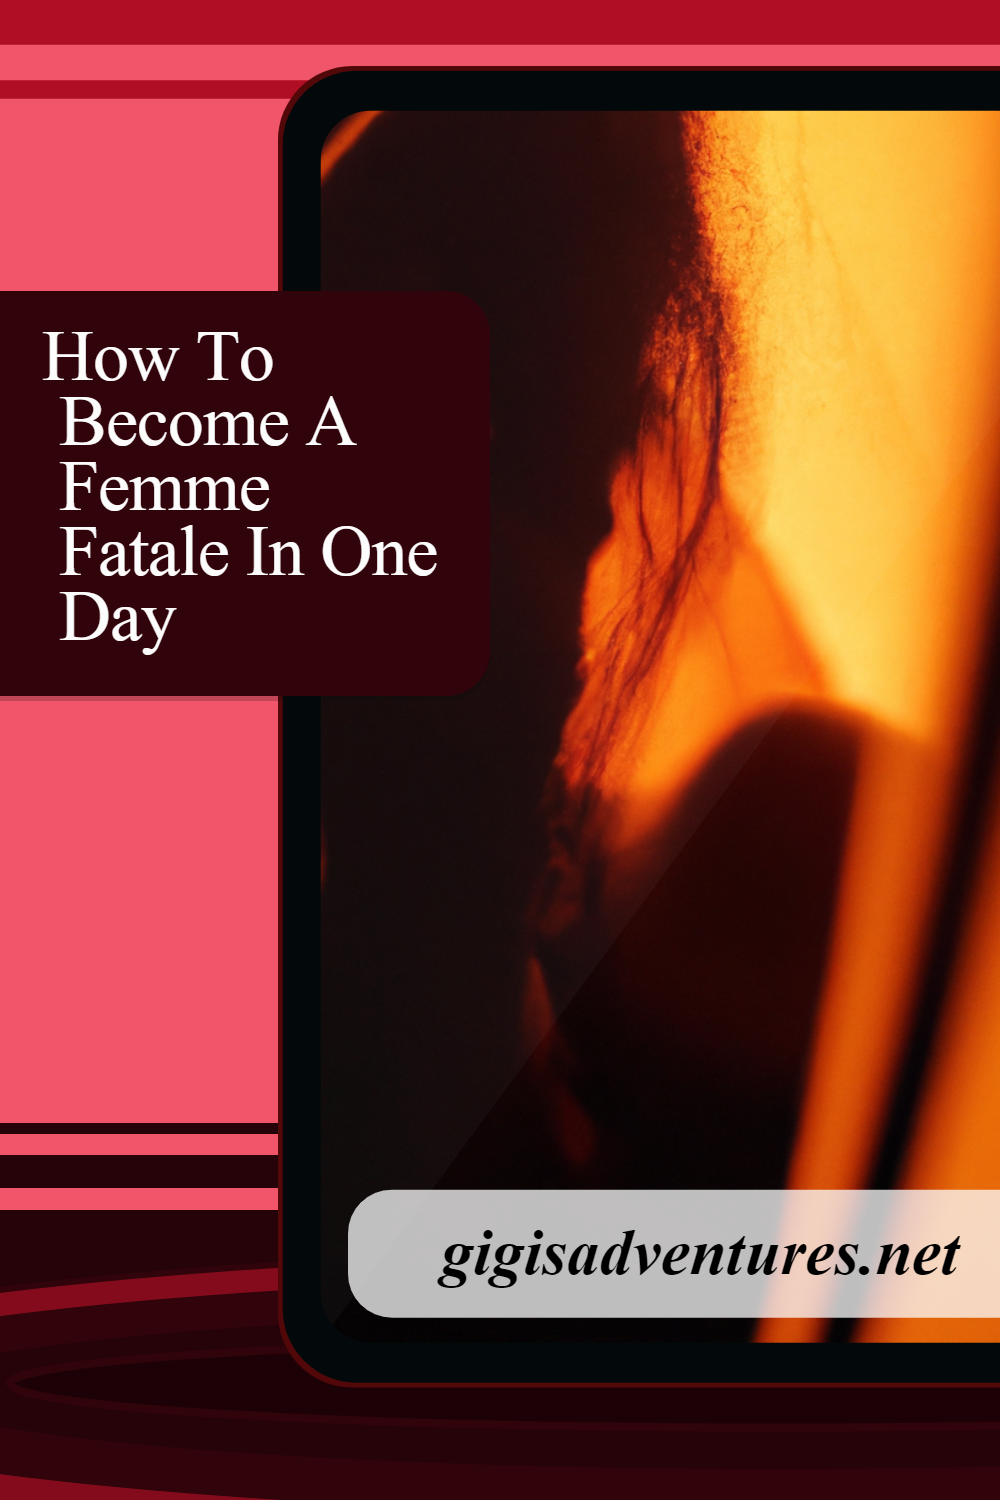 How To Become A Femme Fatale In One Day